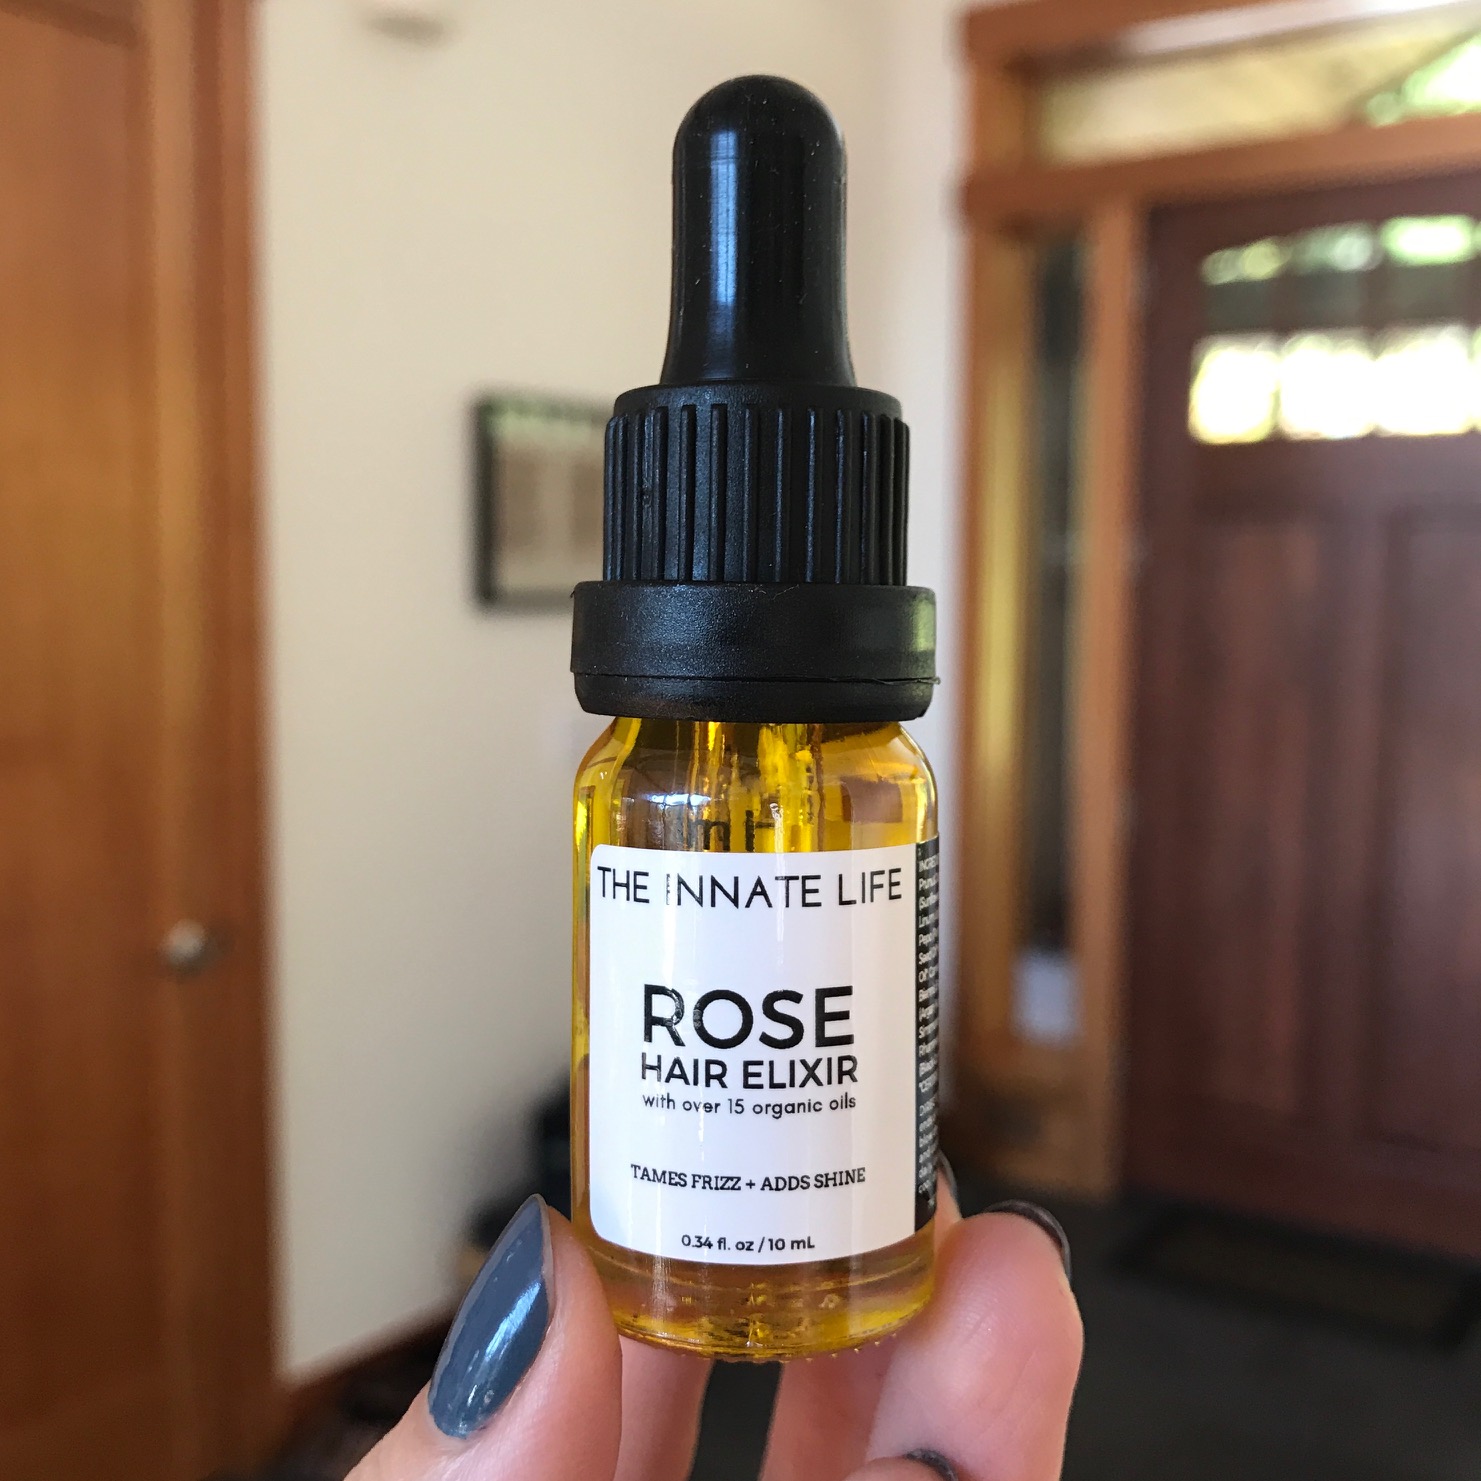 The Innate Life Rose Hair Elixir - Vegan Beauty Review | Vegan and  Cruelty-Free Beauty, Fashion, Food, and Lifestyle : Vegan Beauty Review |  Vegan and Cruelty-Free Beauty, Fashion, Food, and Lifestyle